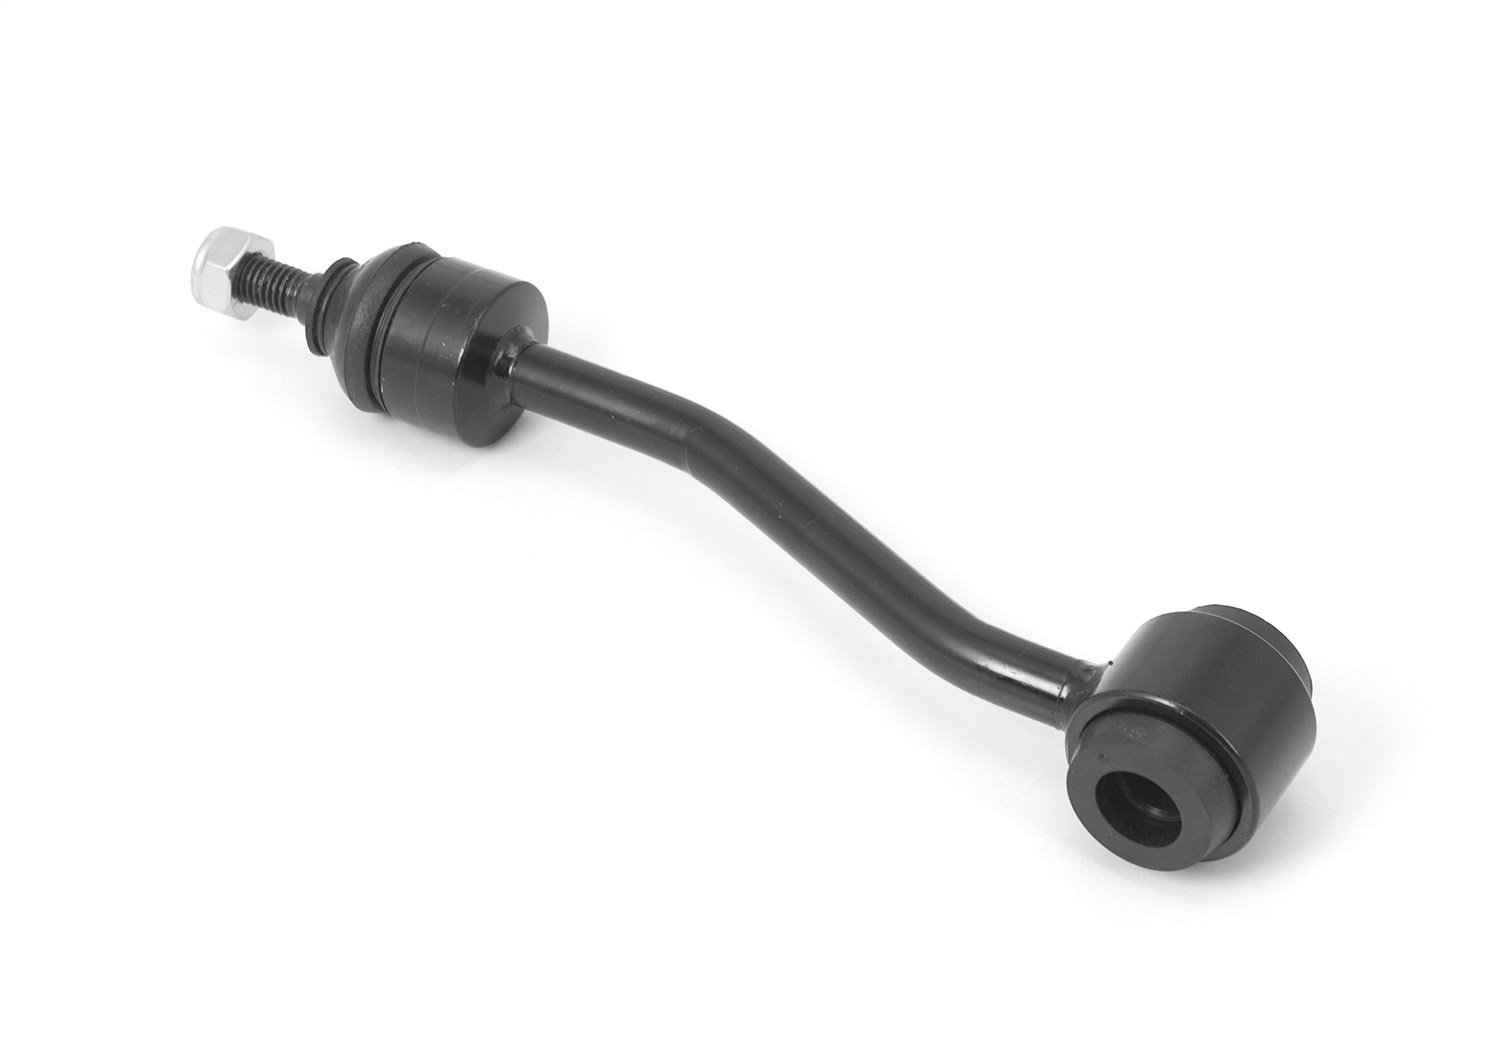 Replacement front sway bar end link from Omix-ADA, Fits 97-06 Jeep Wrangler TJ and 04-06 LJ Wran